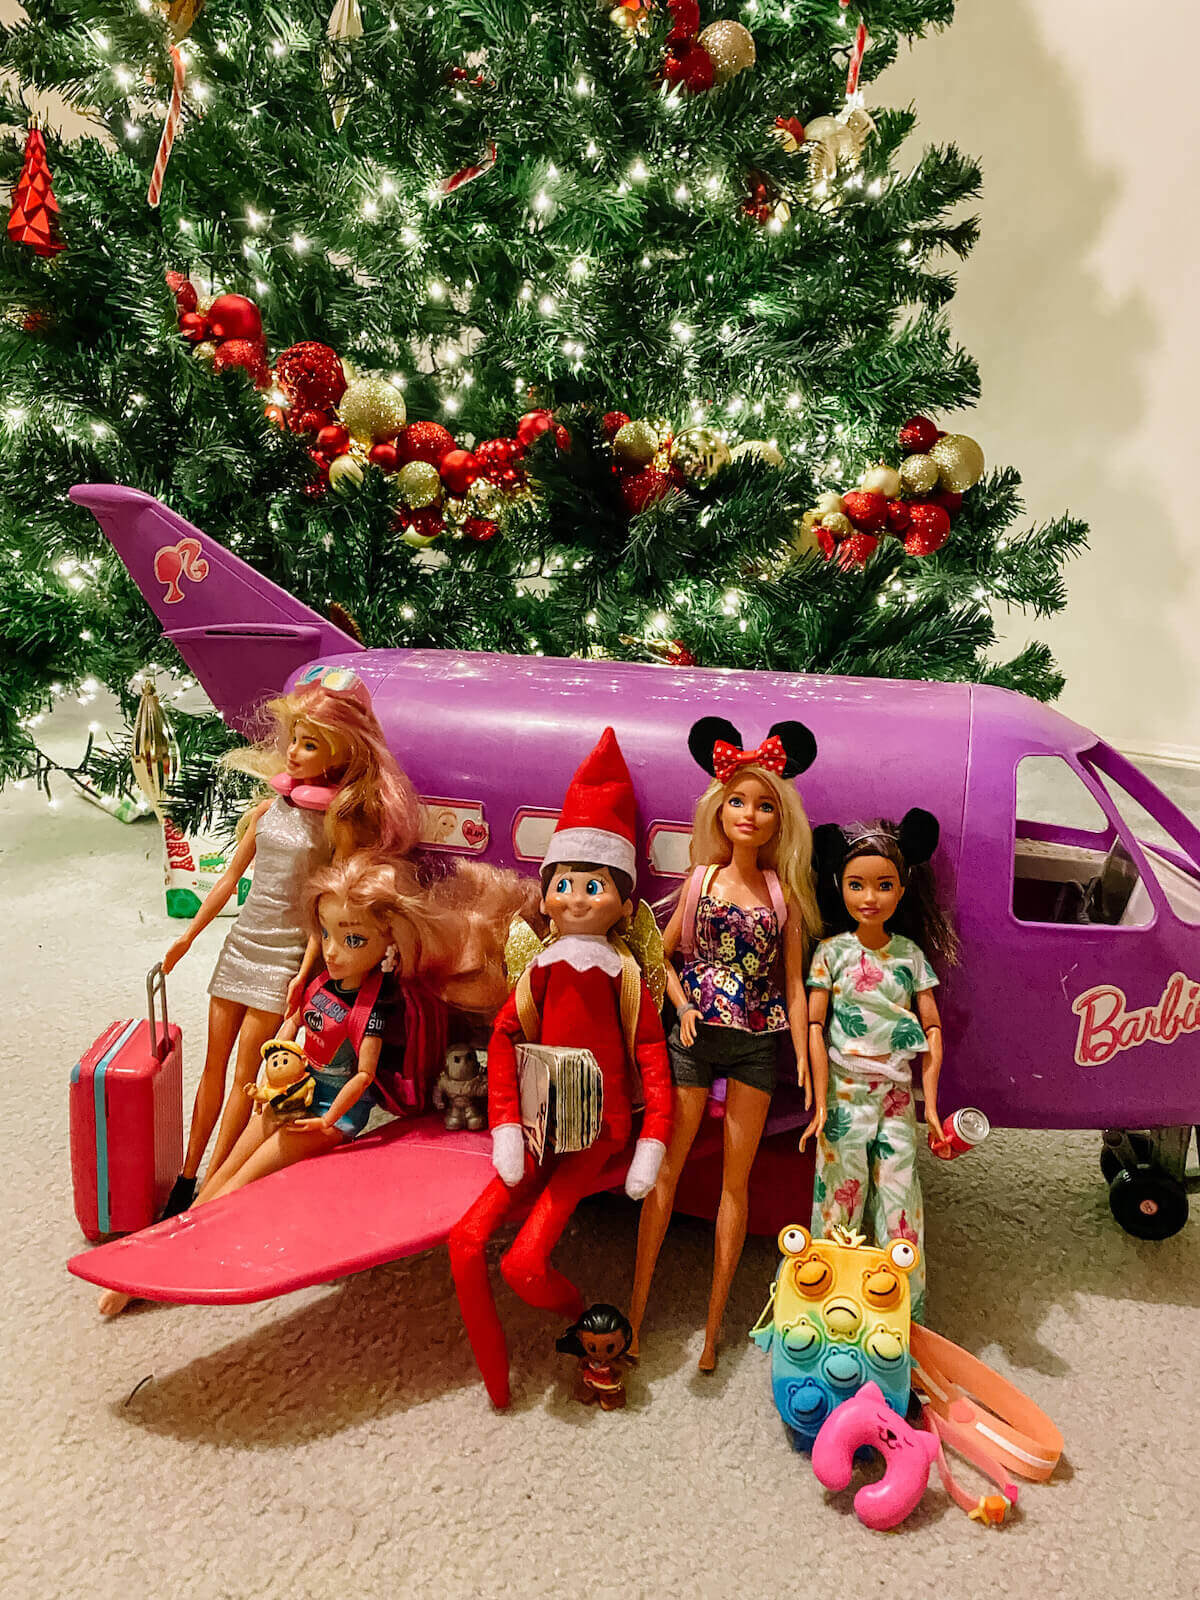 Elf on the shelf going on holidays with barbies in front of barbie plane